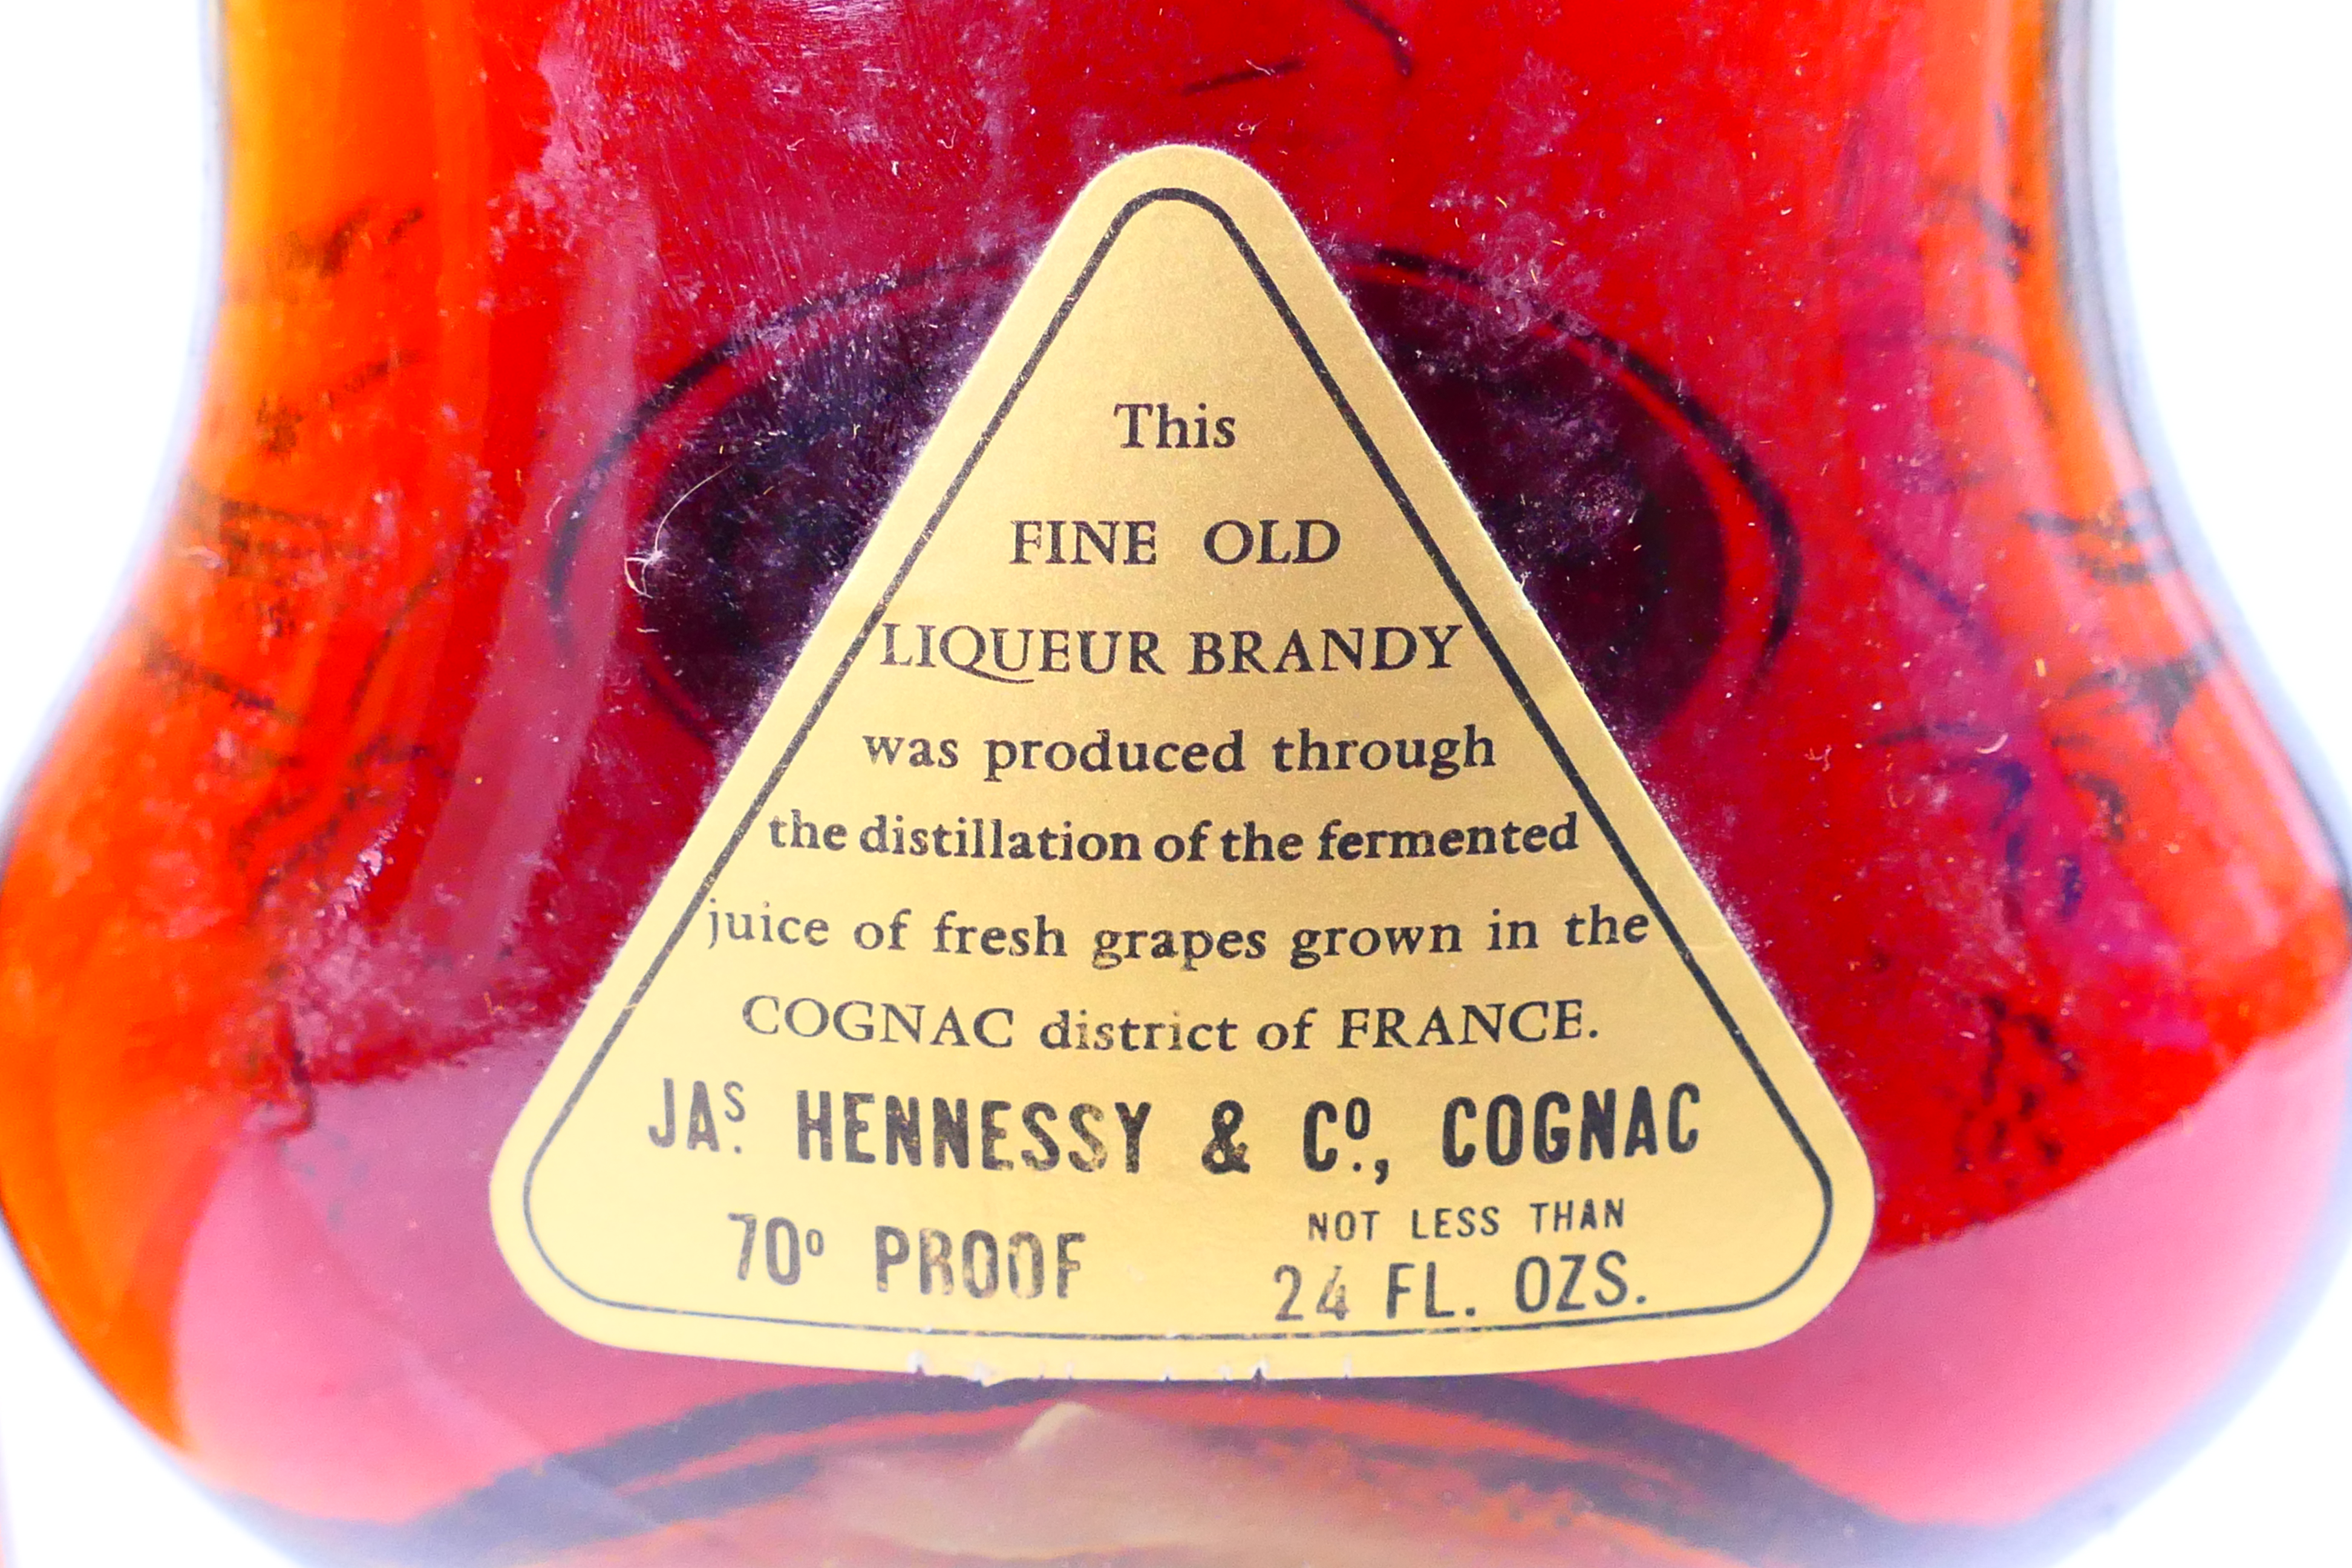 Cognac - One bottle of Hennessy Extra, 70° Proof, Not Less Than 24 fl ozs, contained in carton, - Image 7 of 9